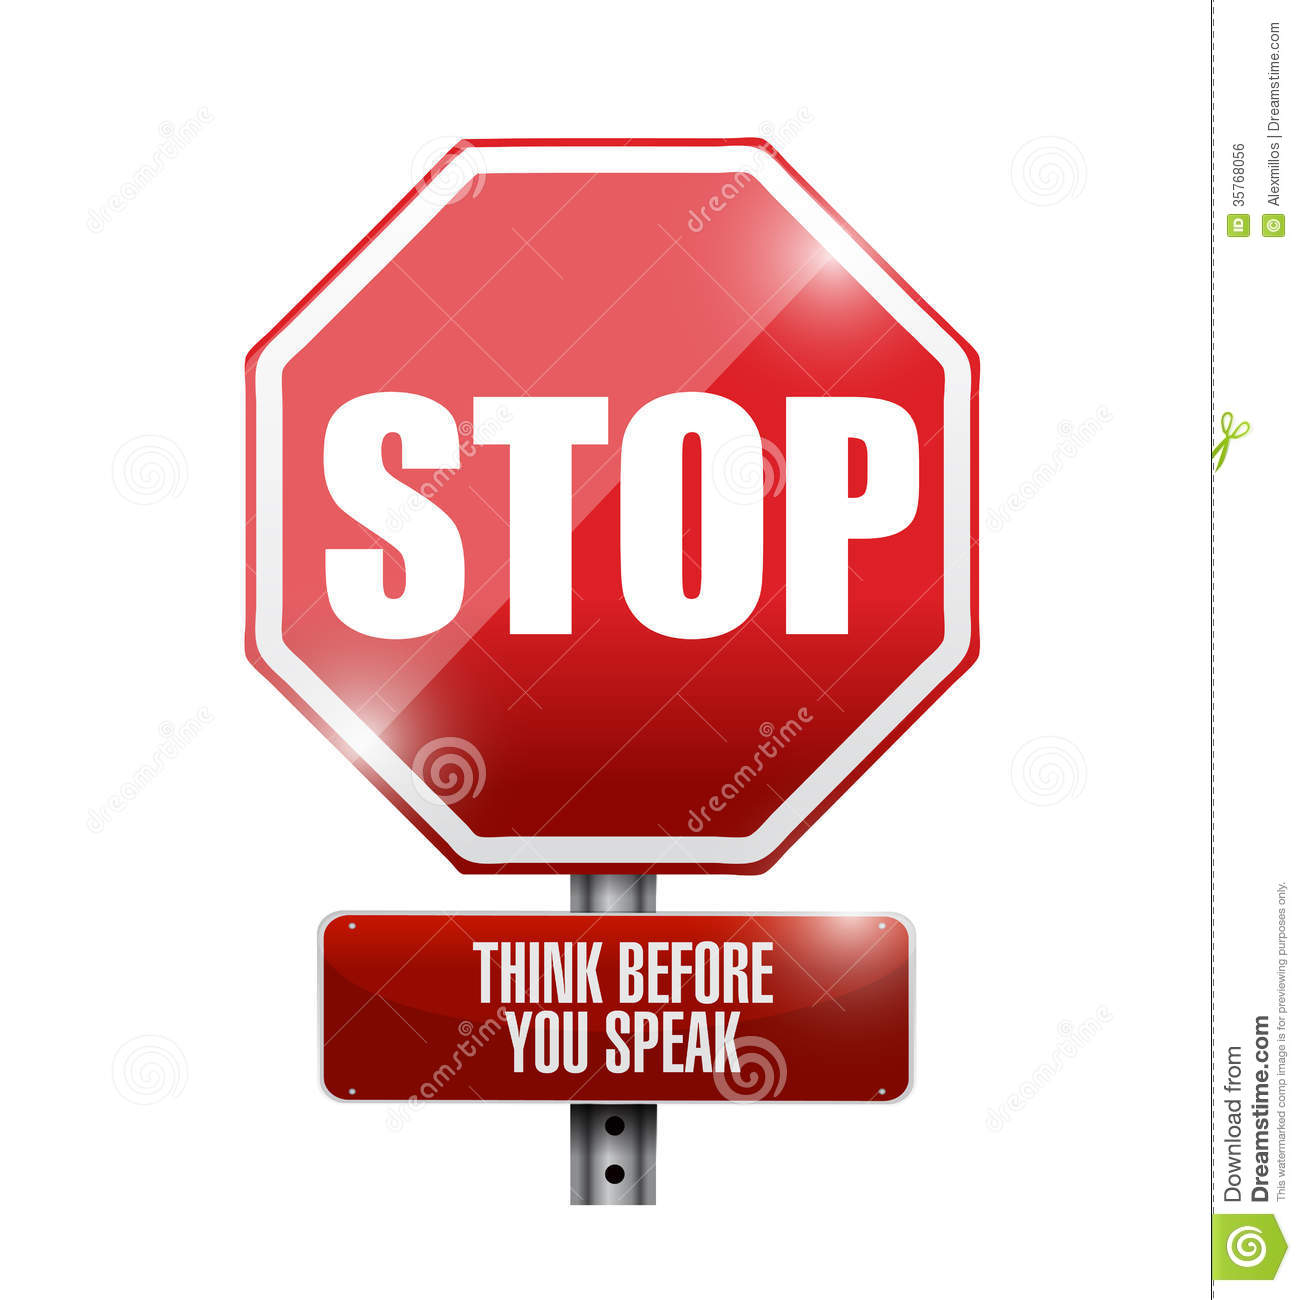 Stop Think Before You Speak Sign Illustration Royalty Free Stock Image